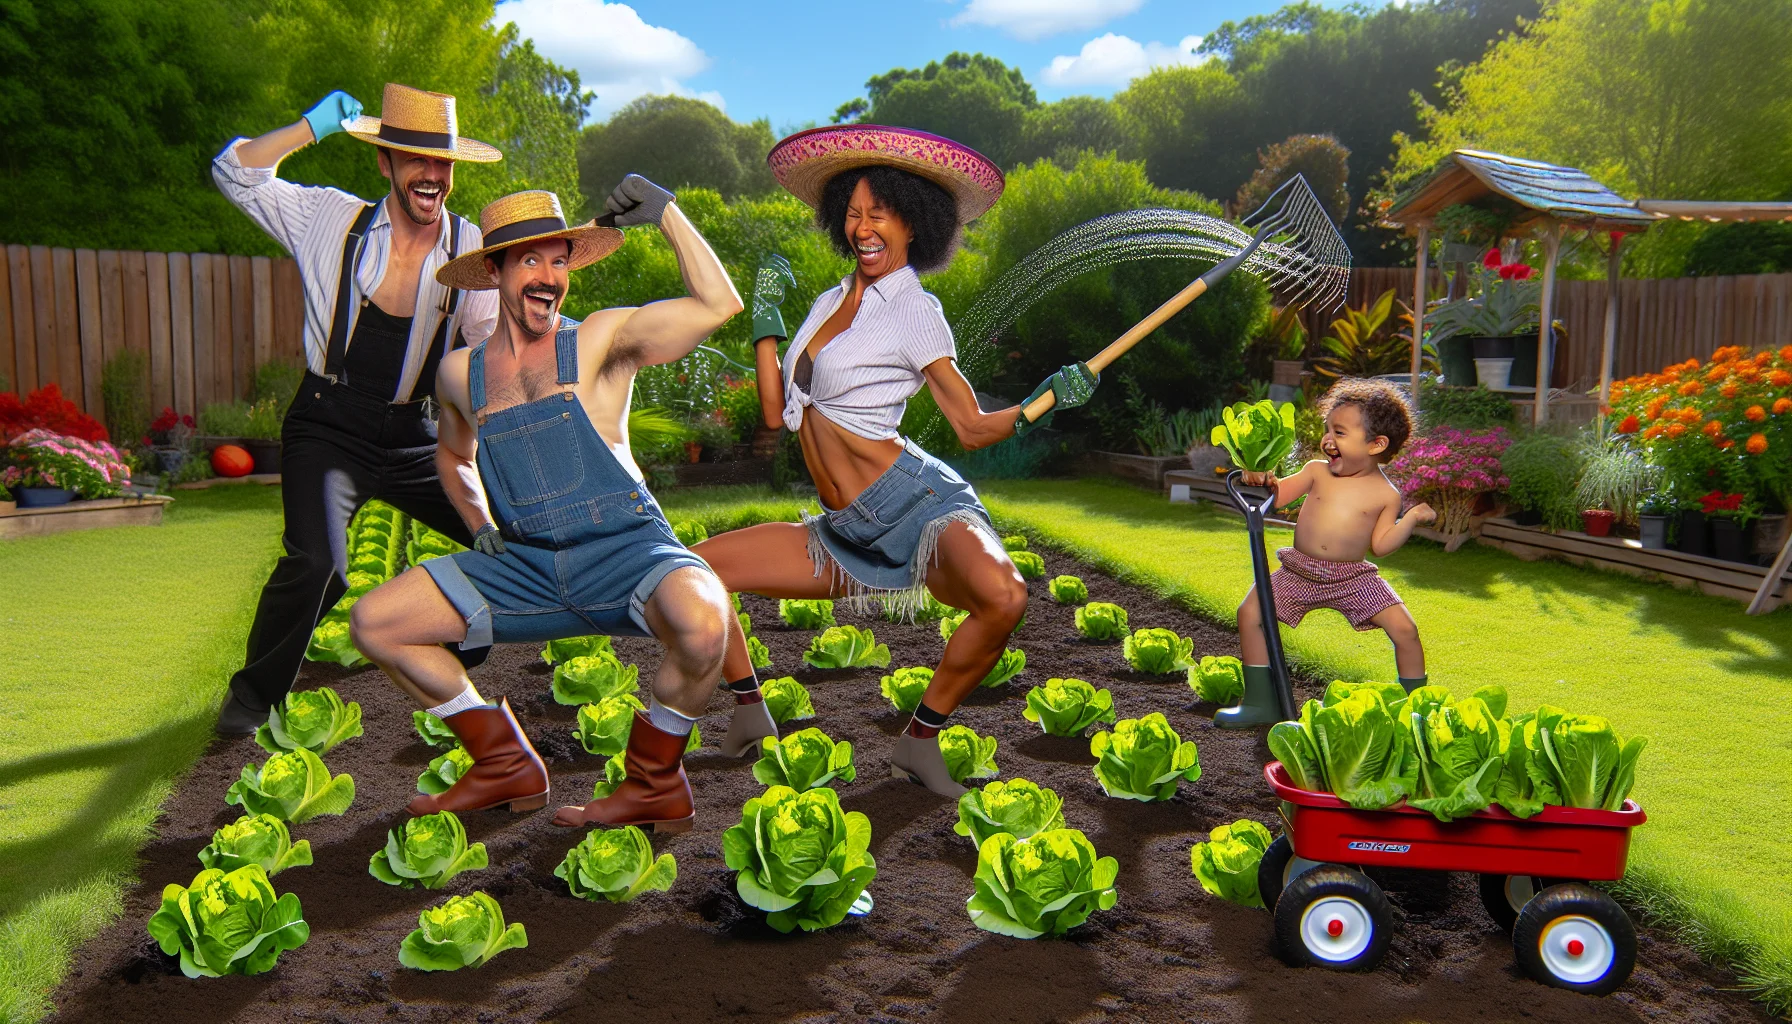 Create an image showcasing a humorous scene in a lush green garden. In this setting, a Caucasian man wearing a sunhat and overalls is doing a flamenco dance with a gardening hoe in one hand while gently nestling romaine lettuce seedlings into the ground with the other. A few feet away, a Black woman wearing gardening gloves and a big smile is chuckling as she waters the sprouting lettuce. A Hispanic child nearby is gleefully pulling a wagon loaded with more lettuce plants. This whole setup should emanate a sense of enjoyment emphasizing the pleasure of gardening.